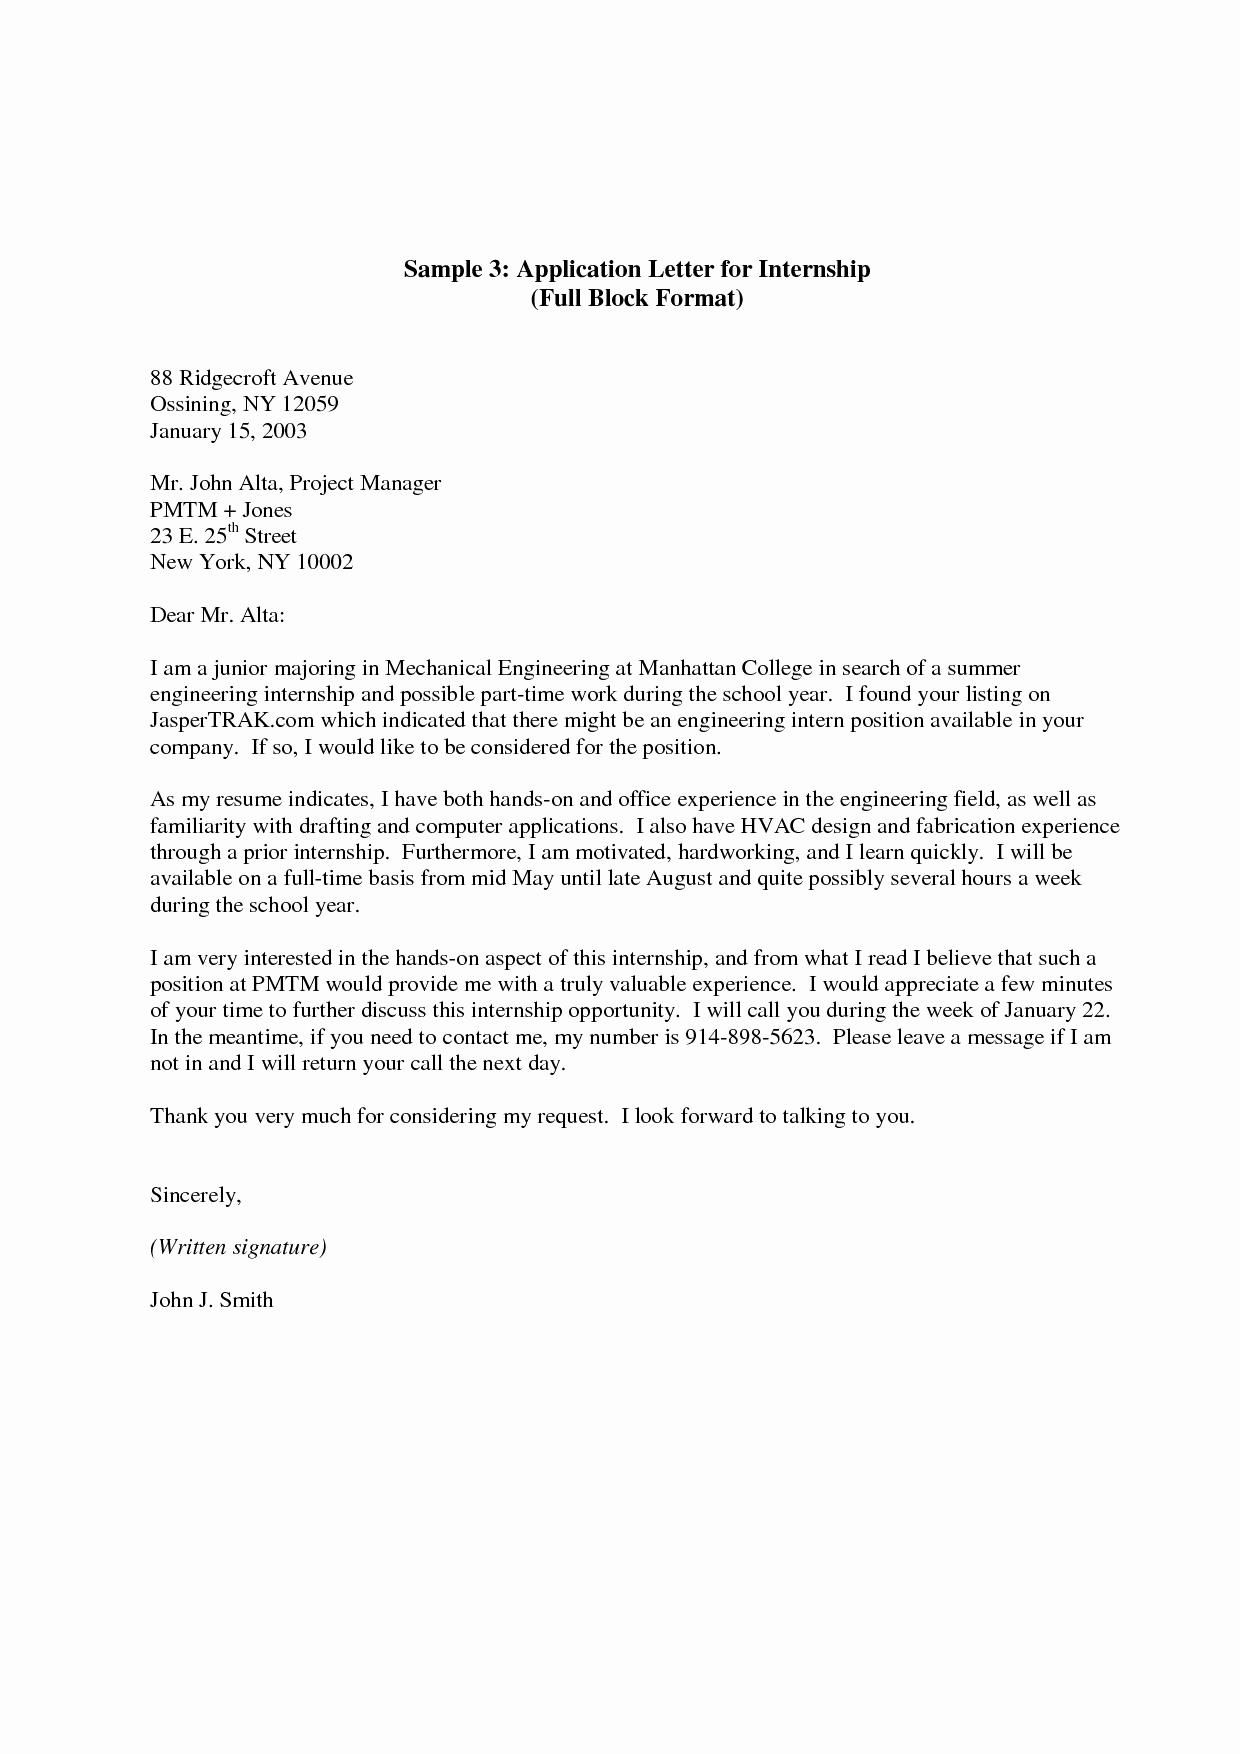 Successful Cover Letter Template - Successful Cover Letters Fresh What Makes A Good Cover Letter New